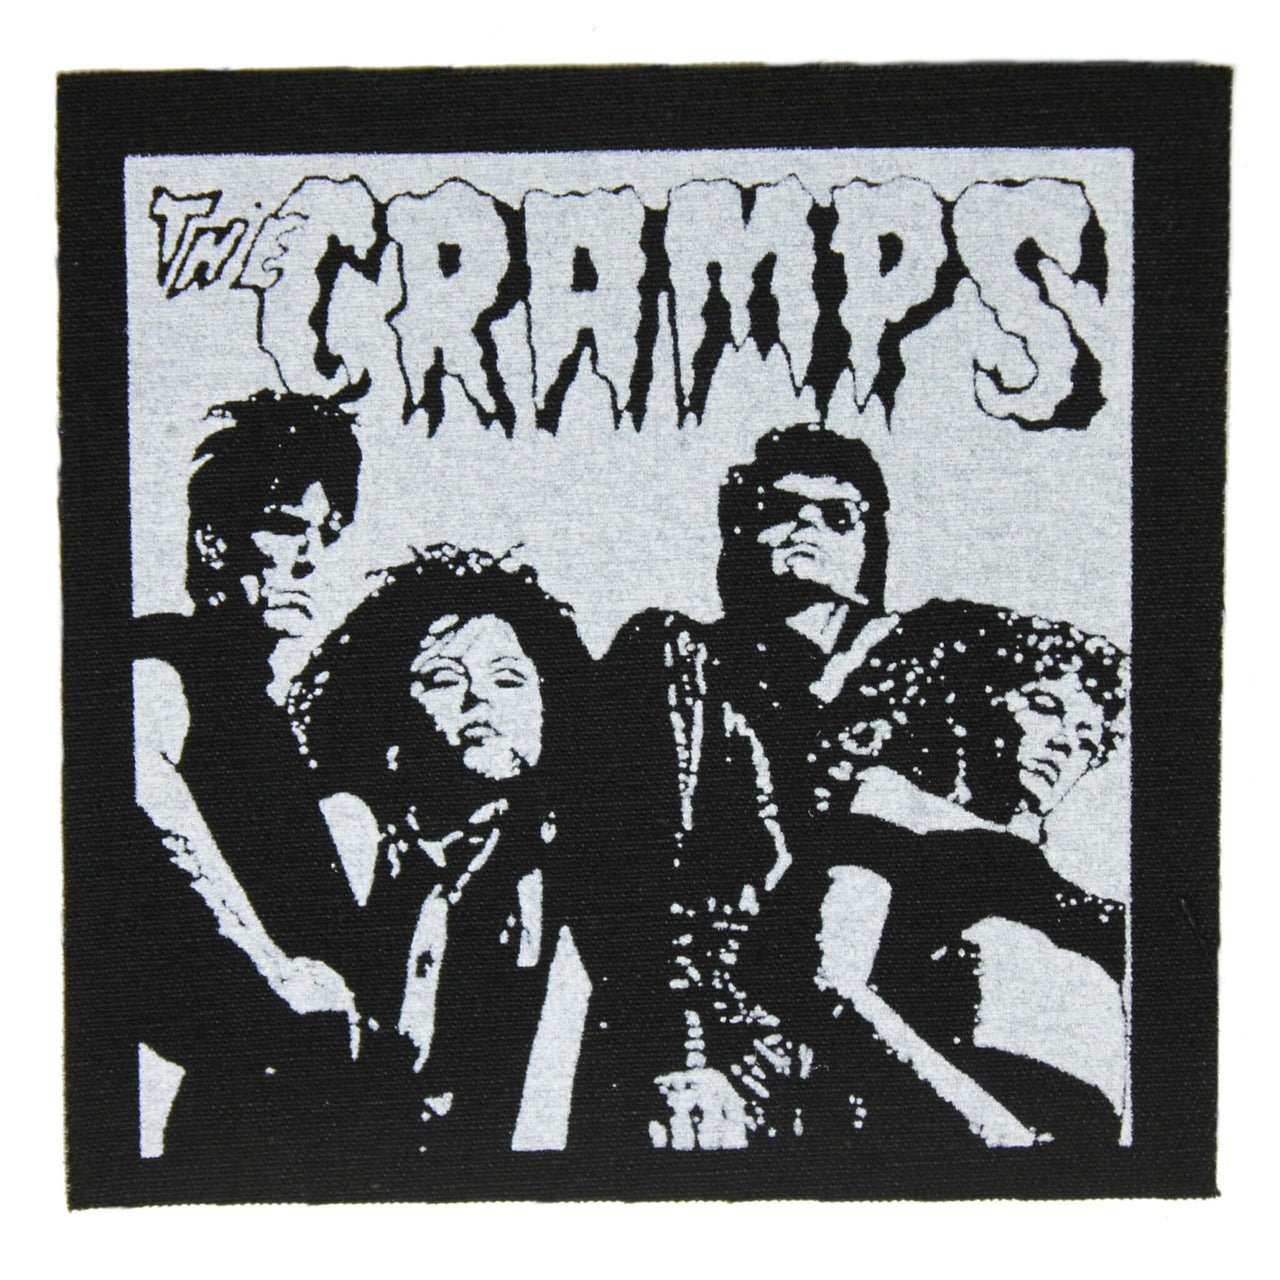 The Cramps Band Photo Cloth Patch